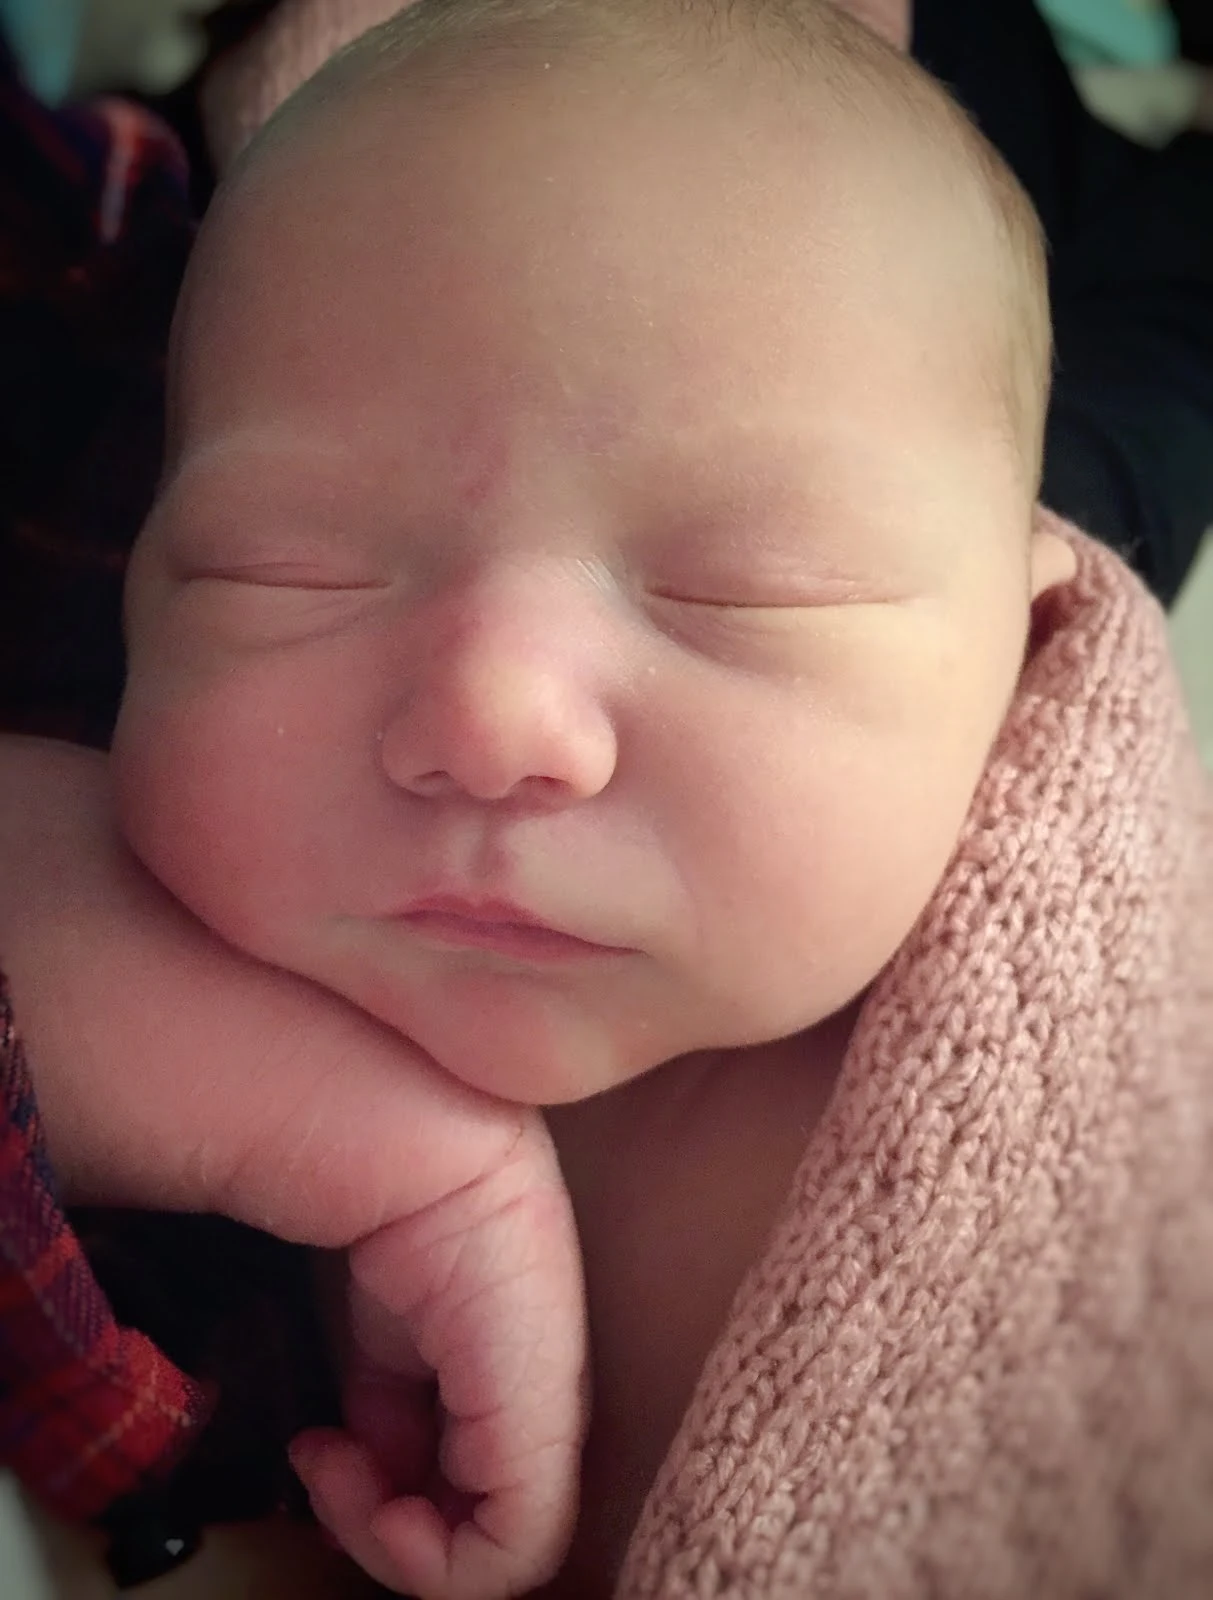 A close up of a newborn baby with her eyes closed resting on her arm